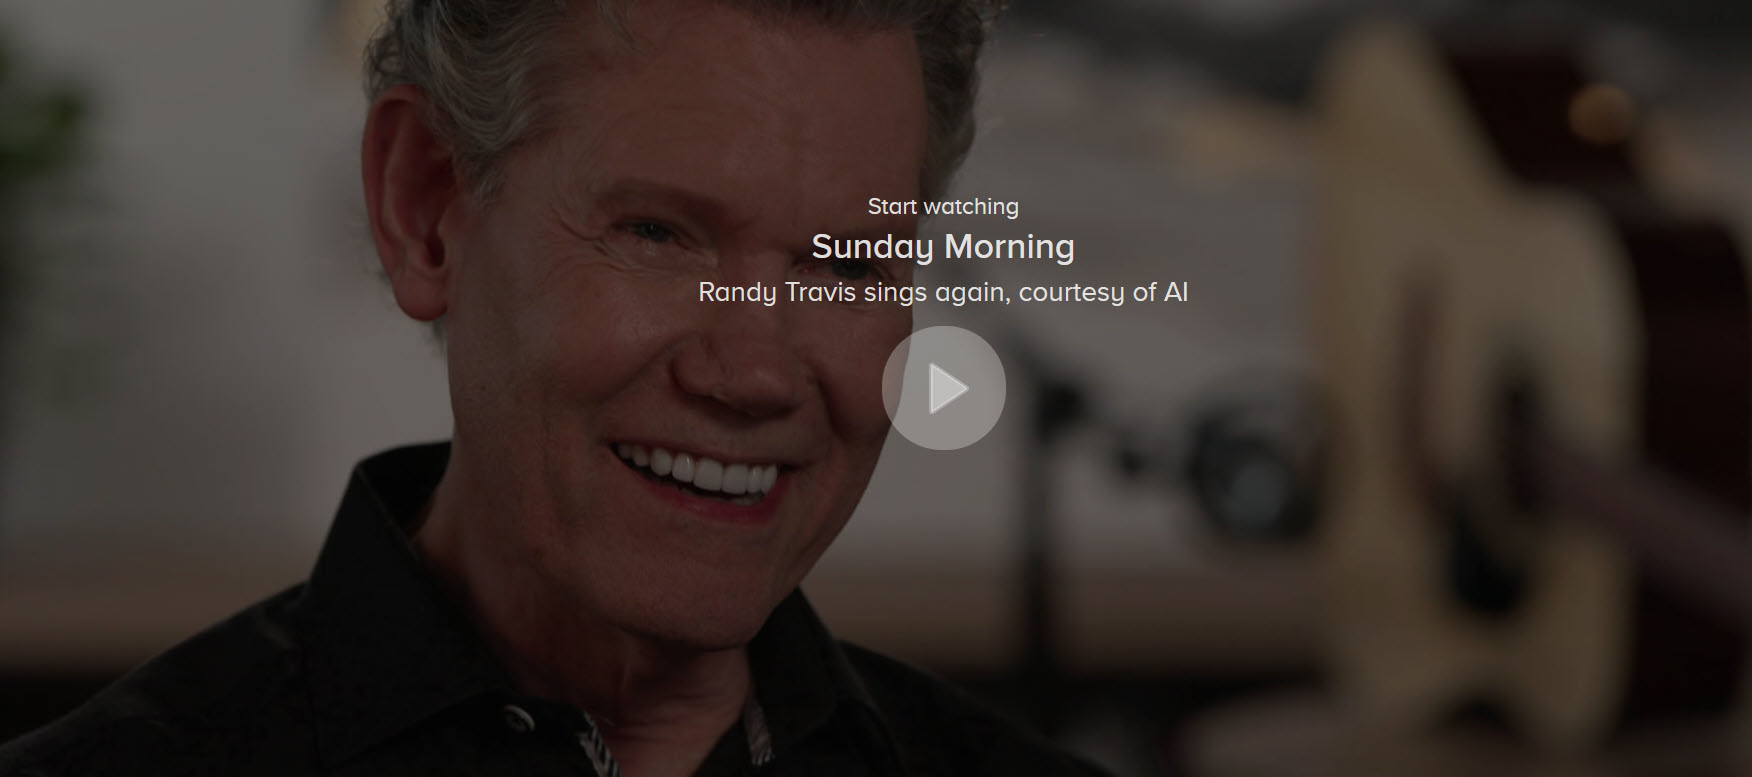 Sunday Morning Randy Travis sings again with AI